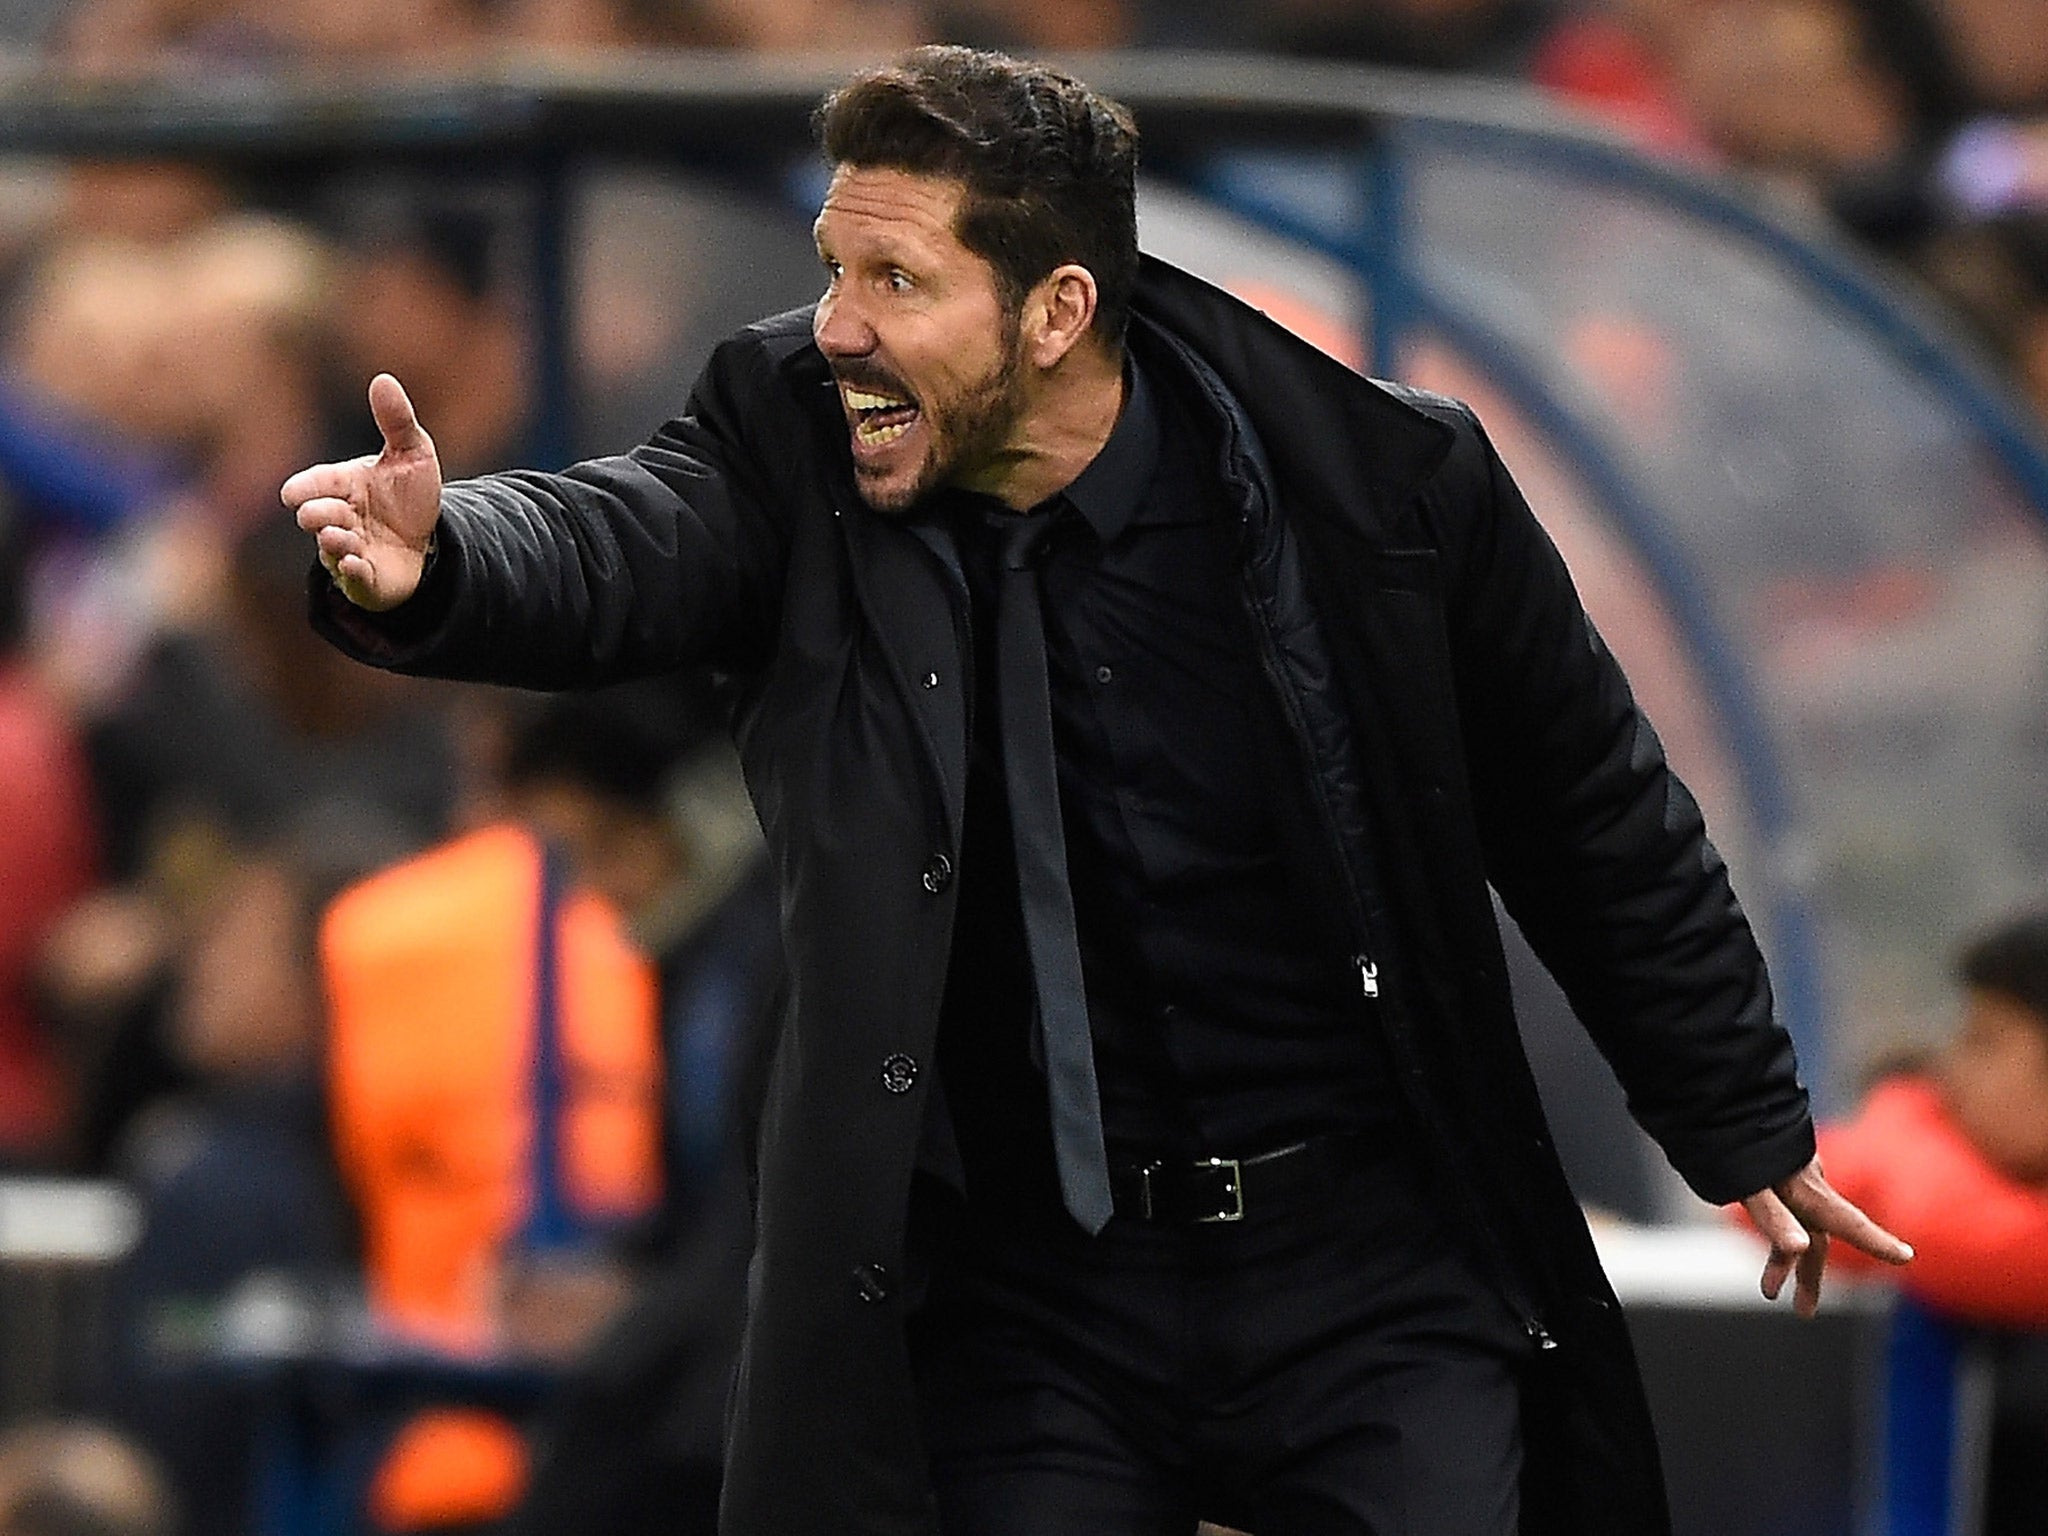 Atletico Madrid manager Diego Simeone deployed his side to shut down Barcelona